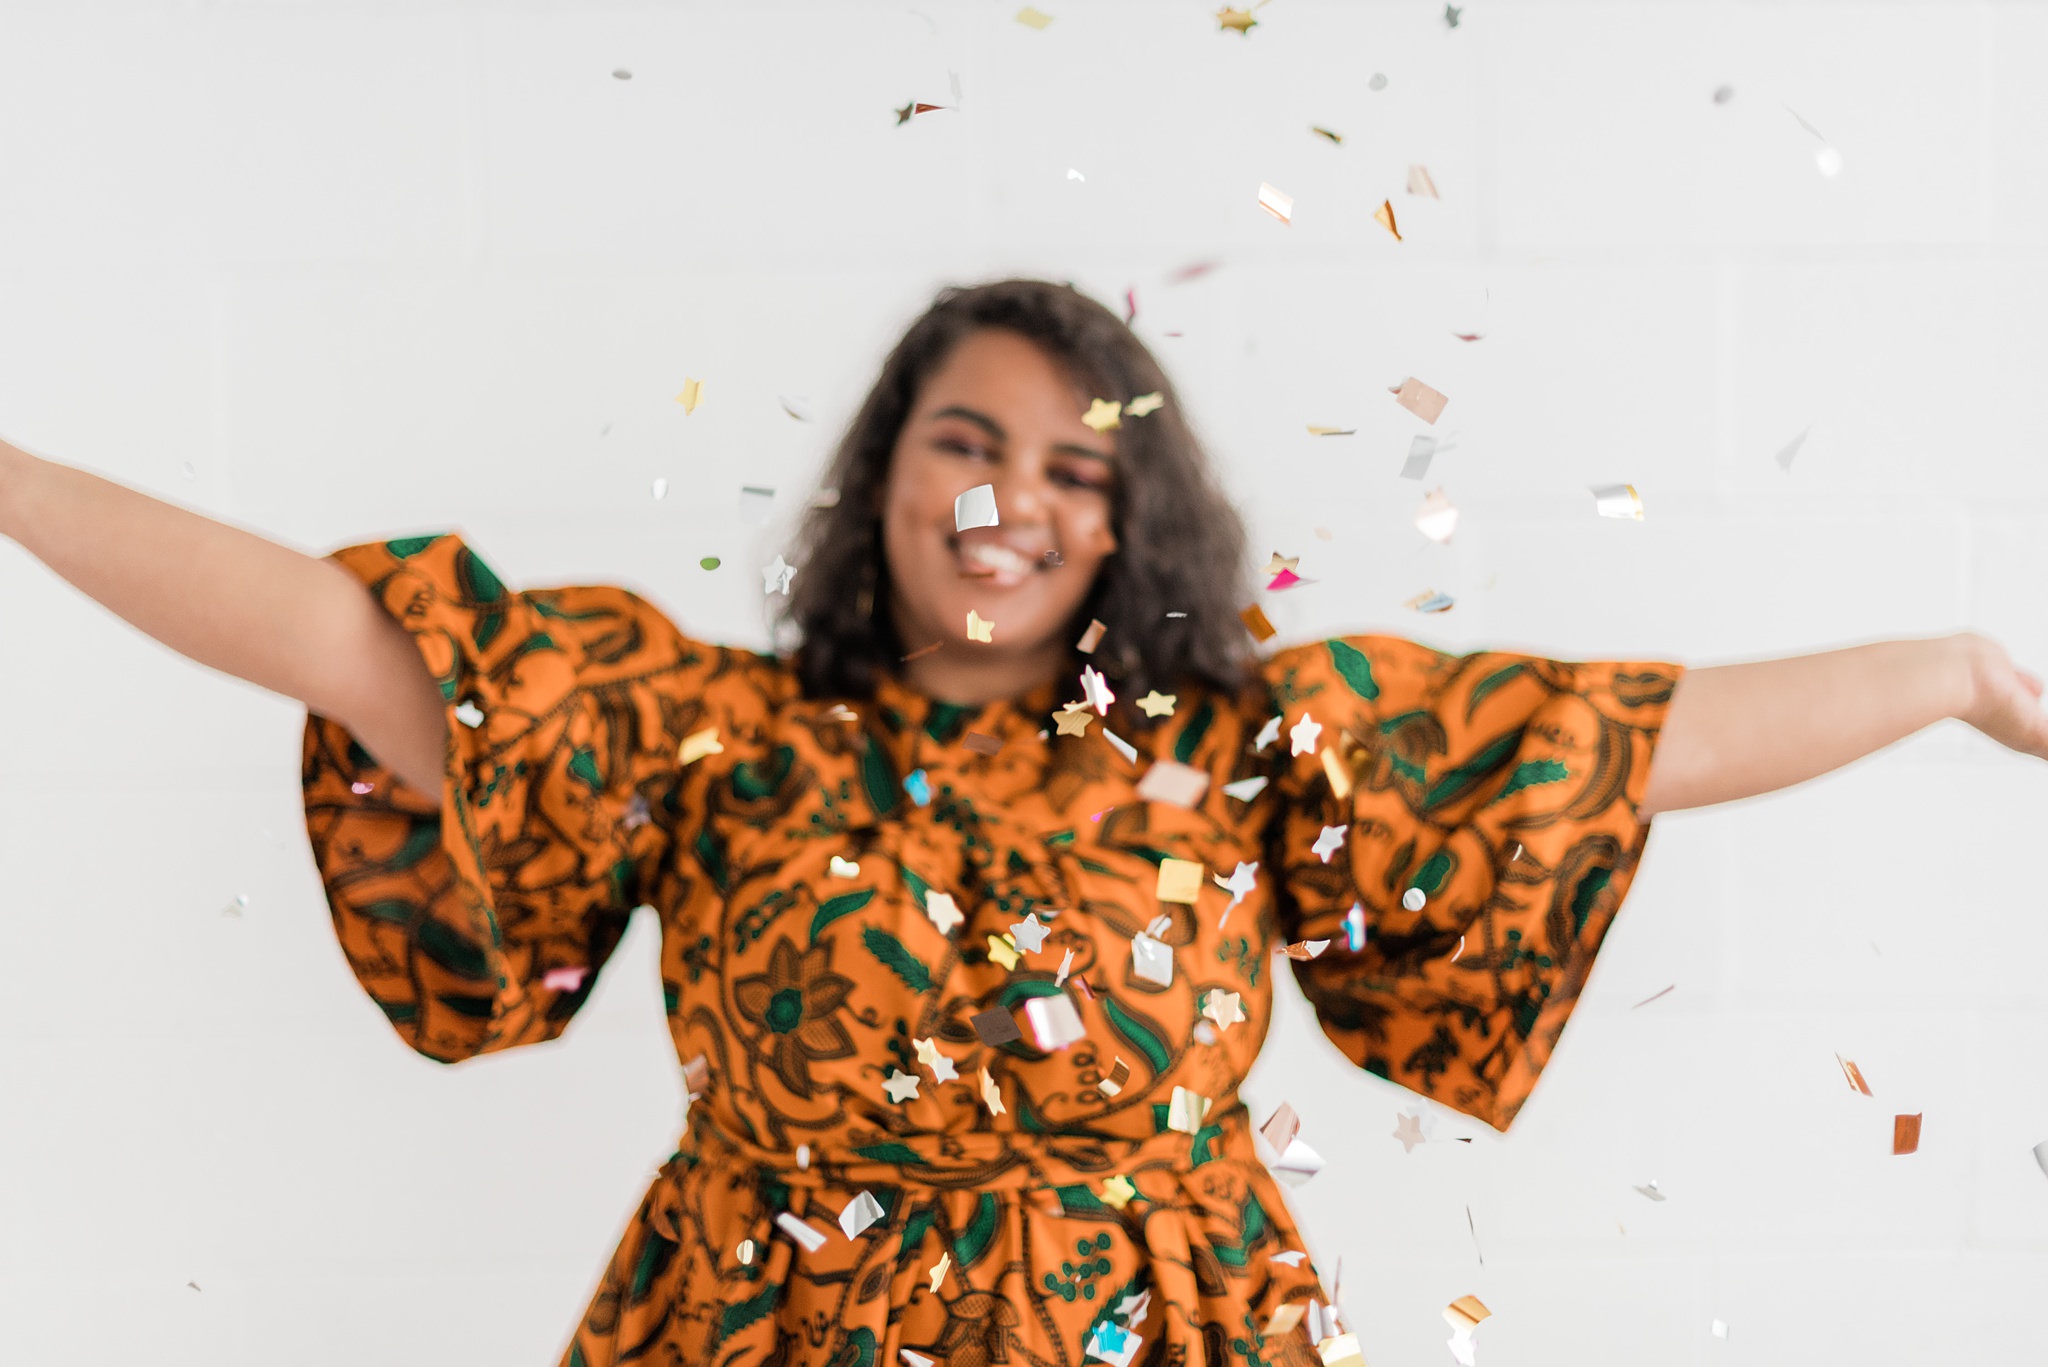 A black woman wearing a flared orange, patterned dress. The focus is on the confetti she's throwing.